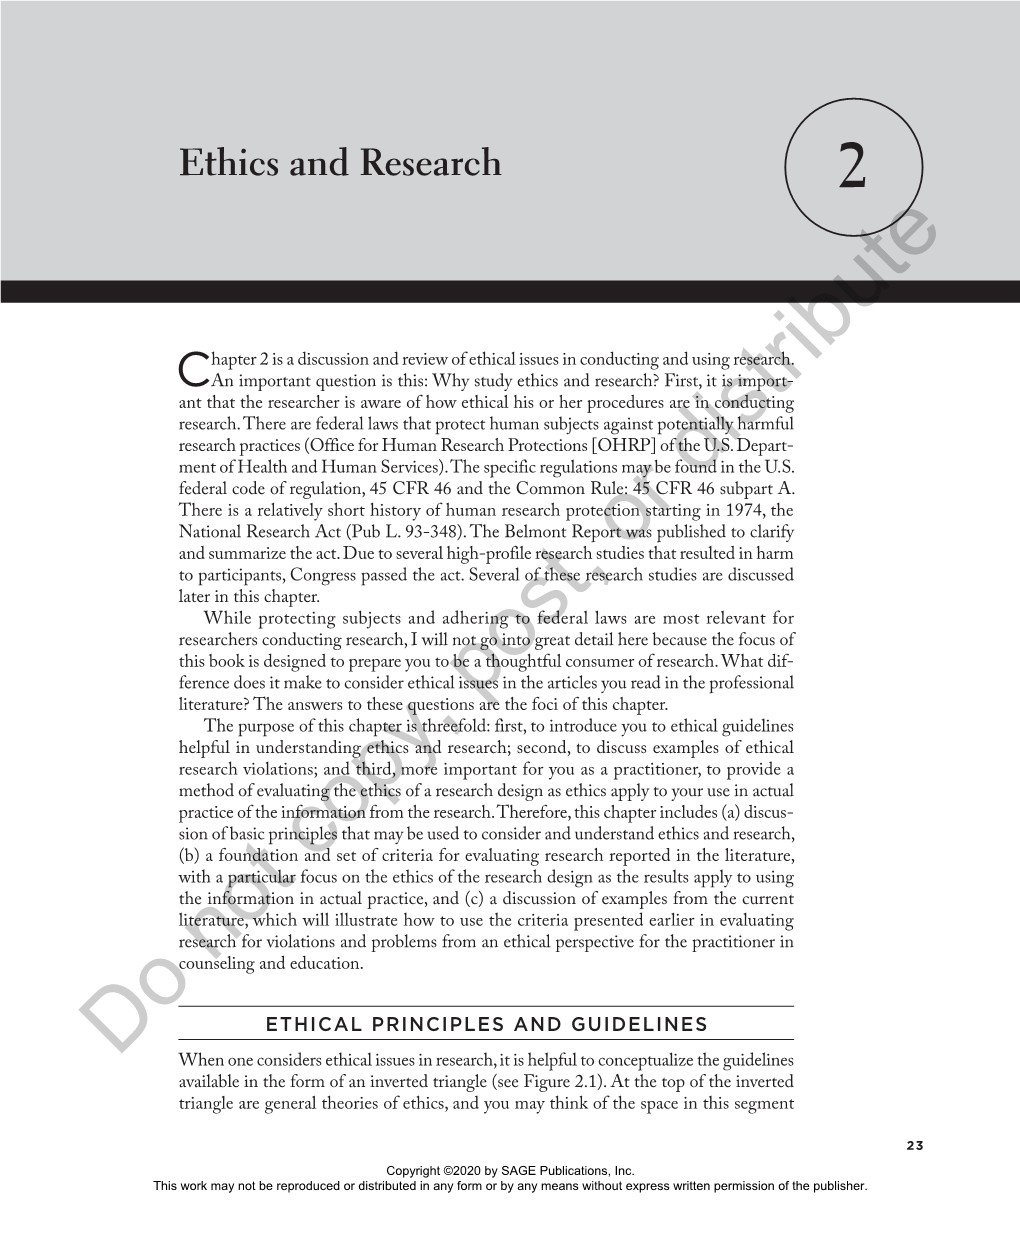 Chapter 2: Ethics and Research